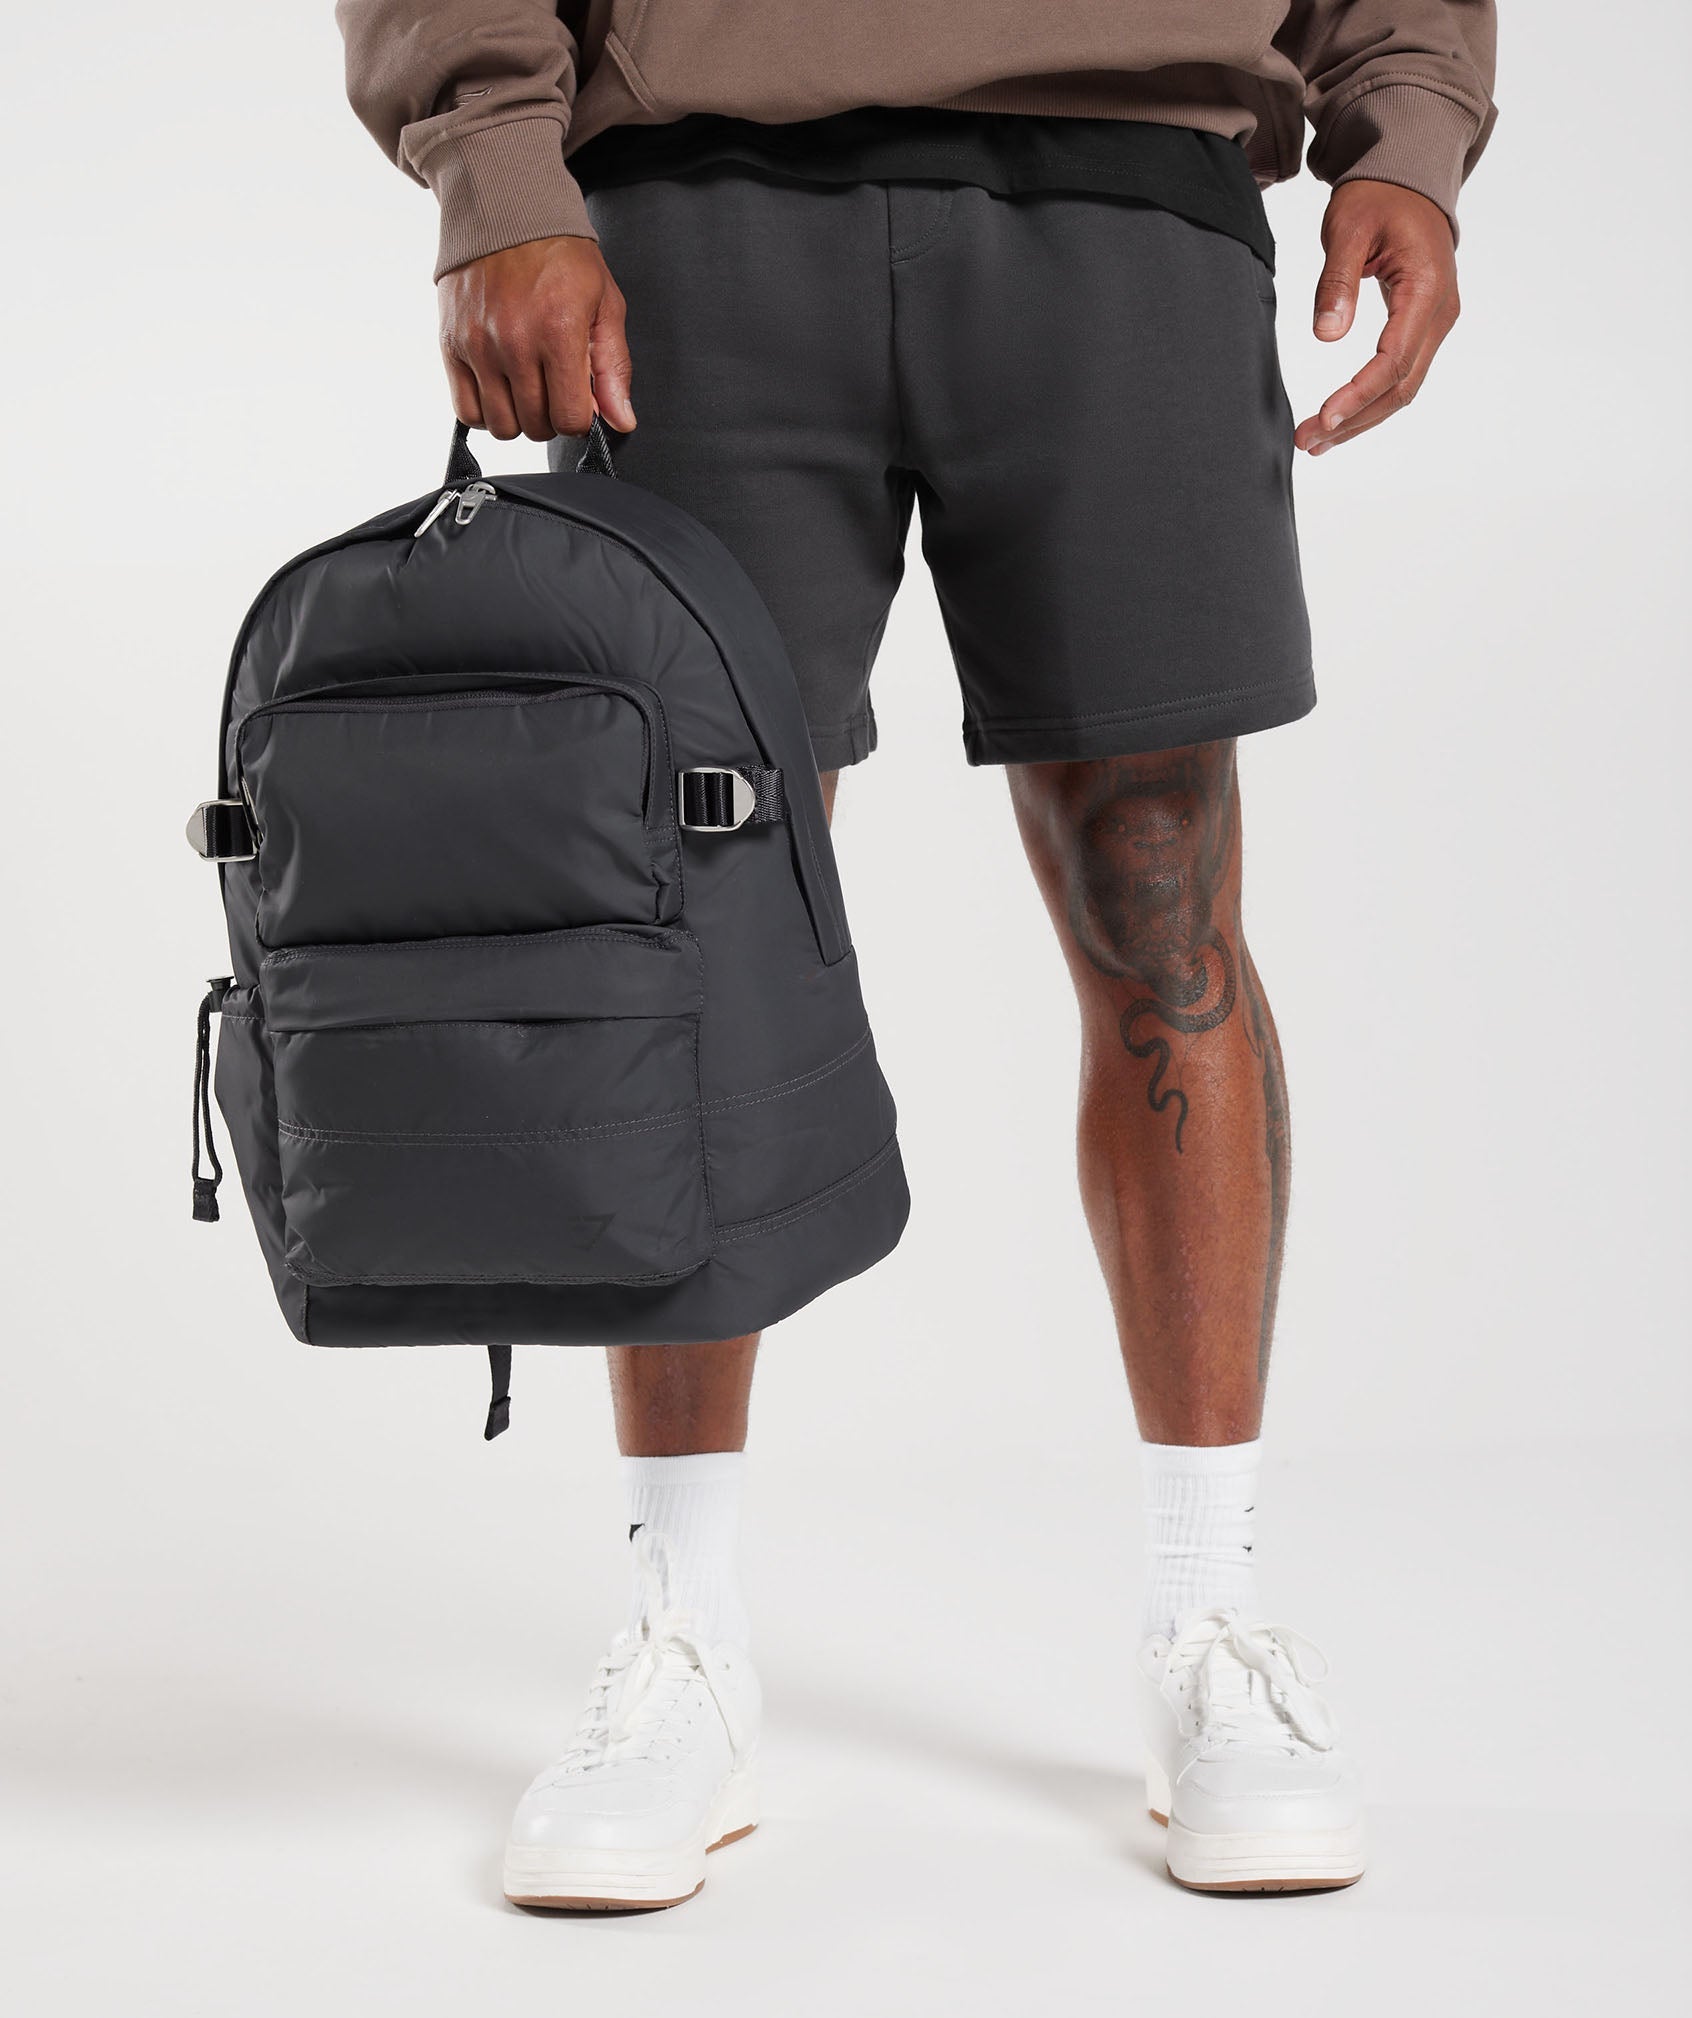 Lifestyle Backpack in Onyx Grey - view 8